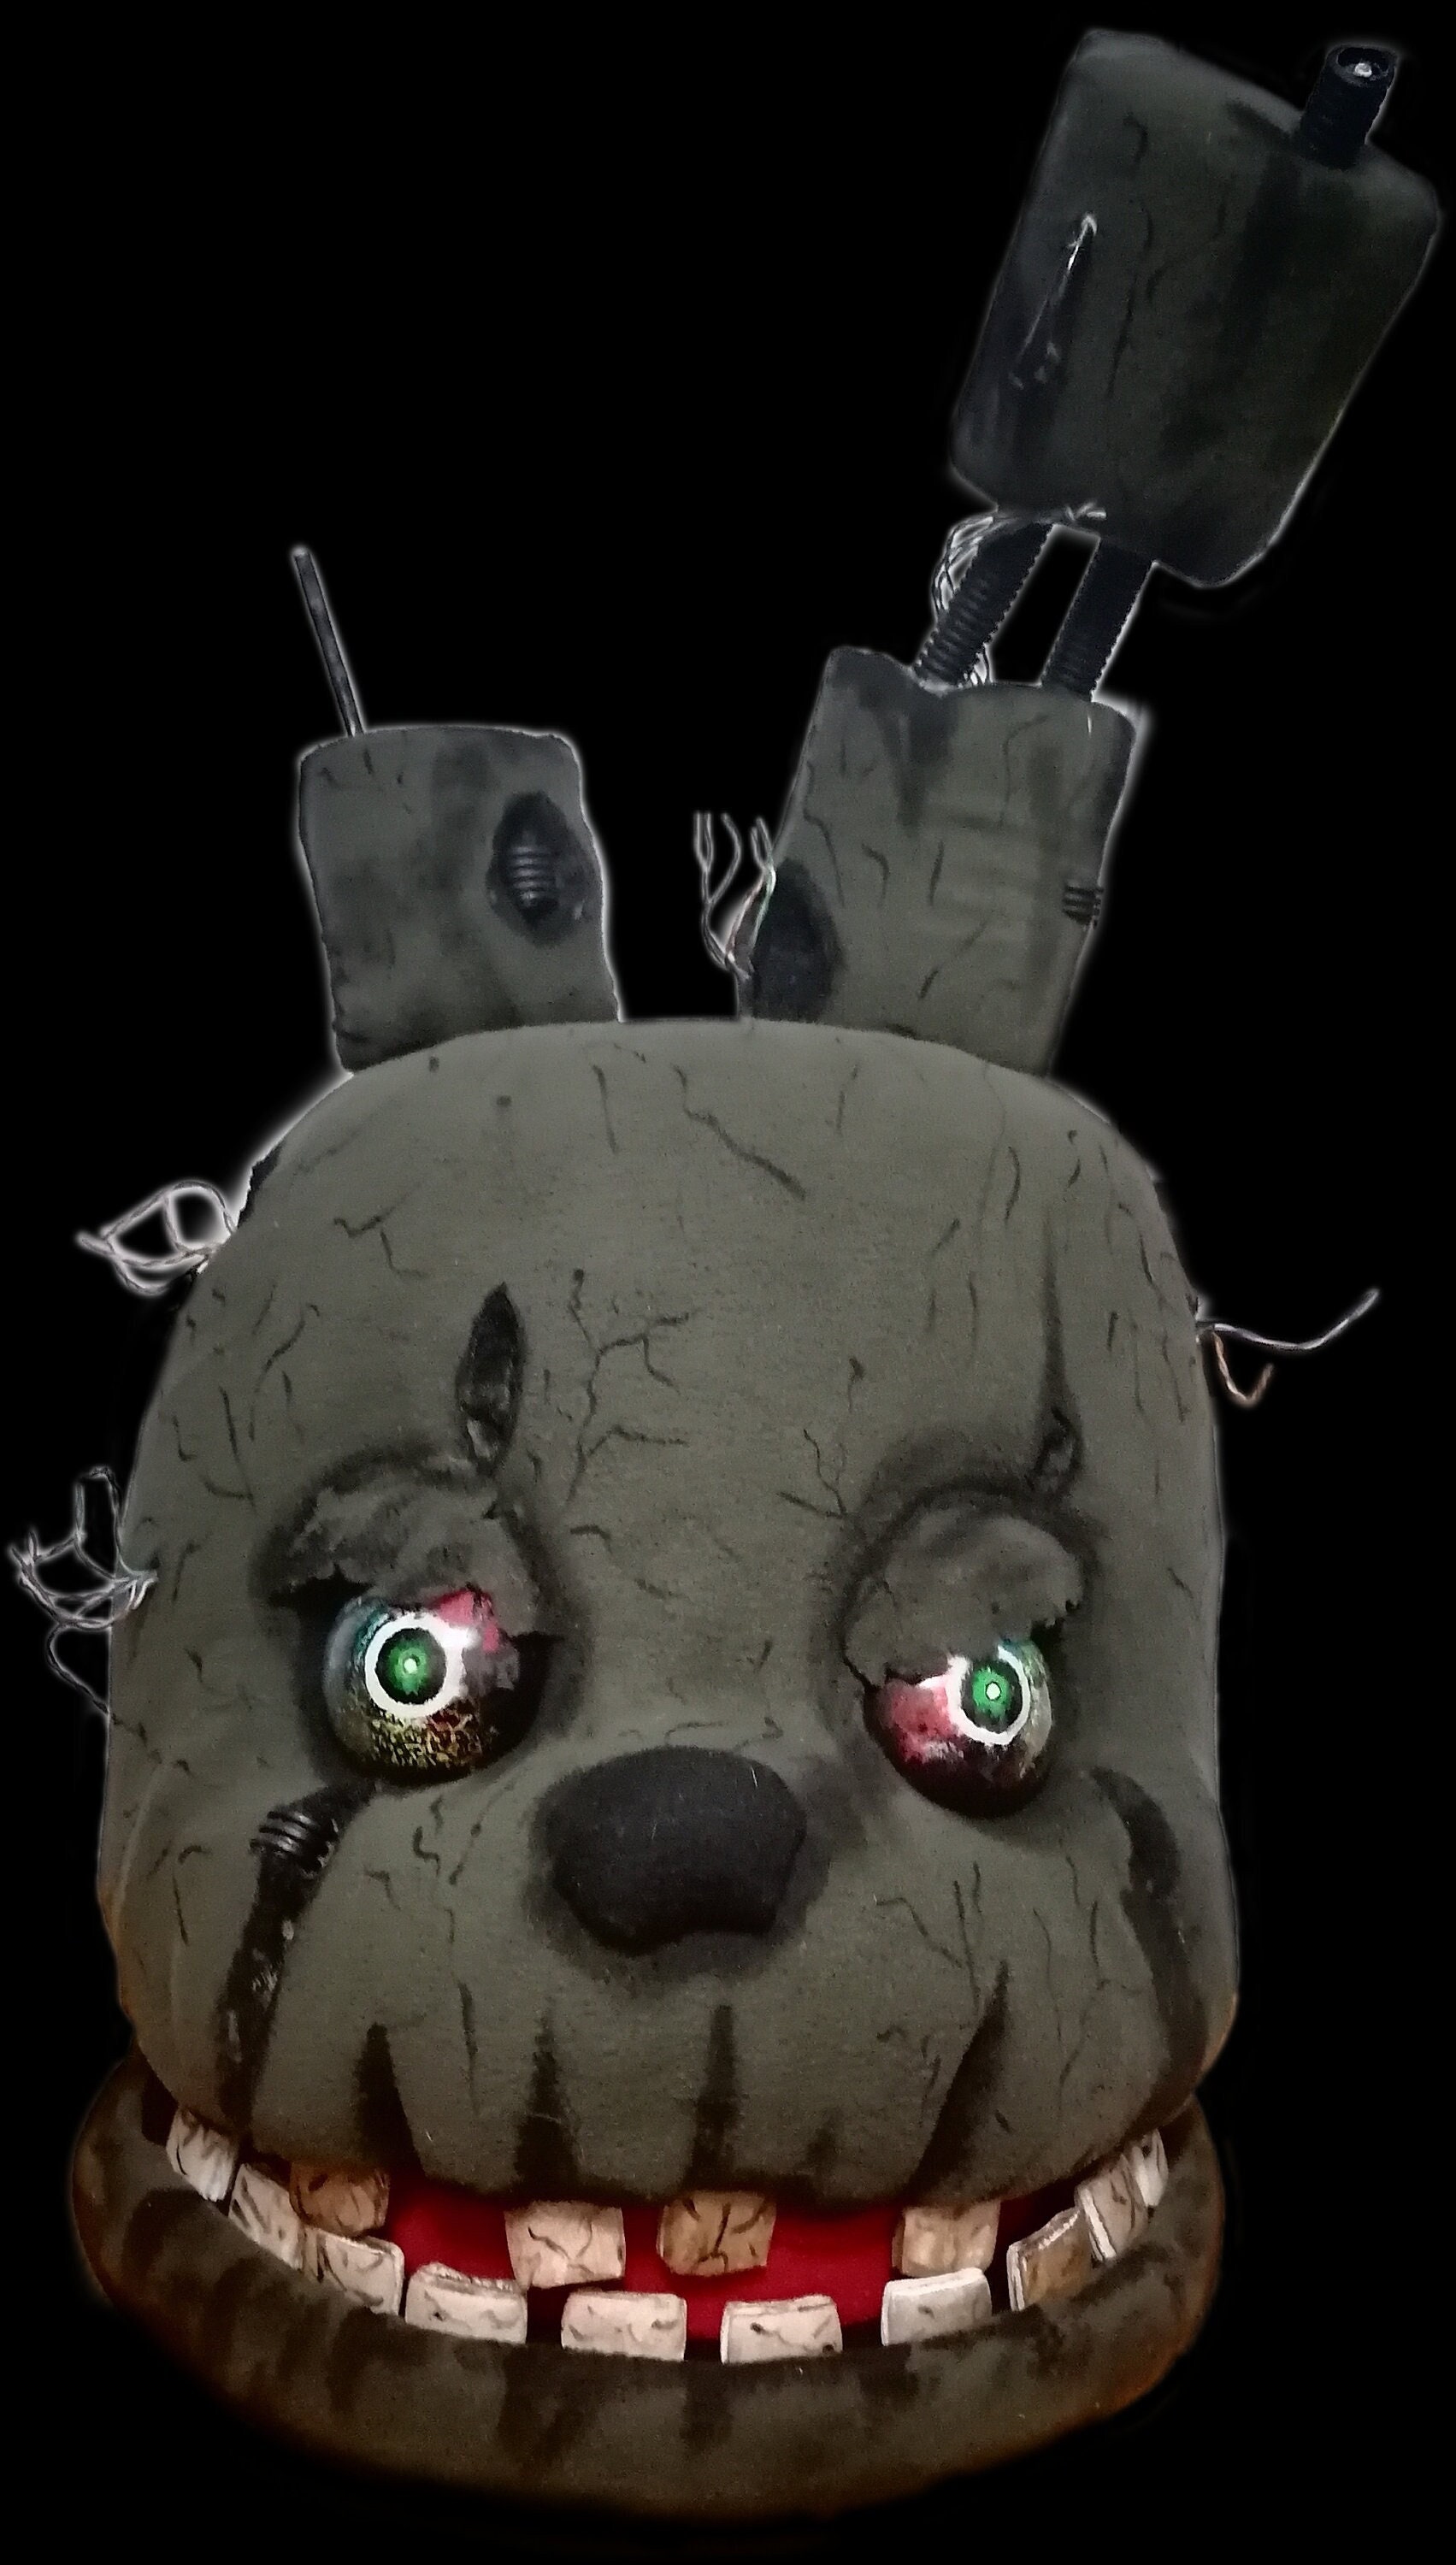 Springtrap Five Nights at Freddy's - Etsy